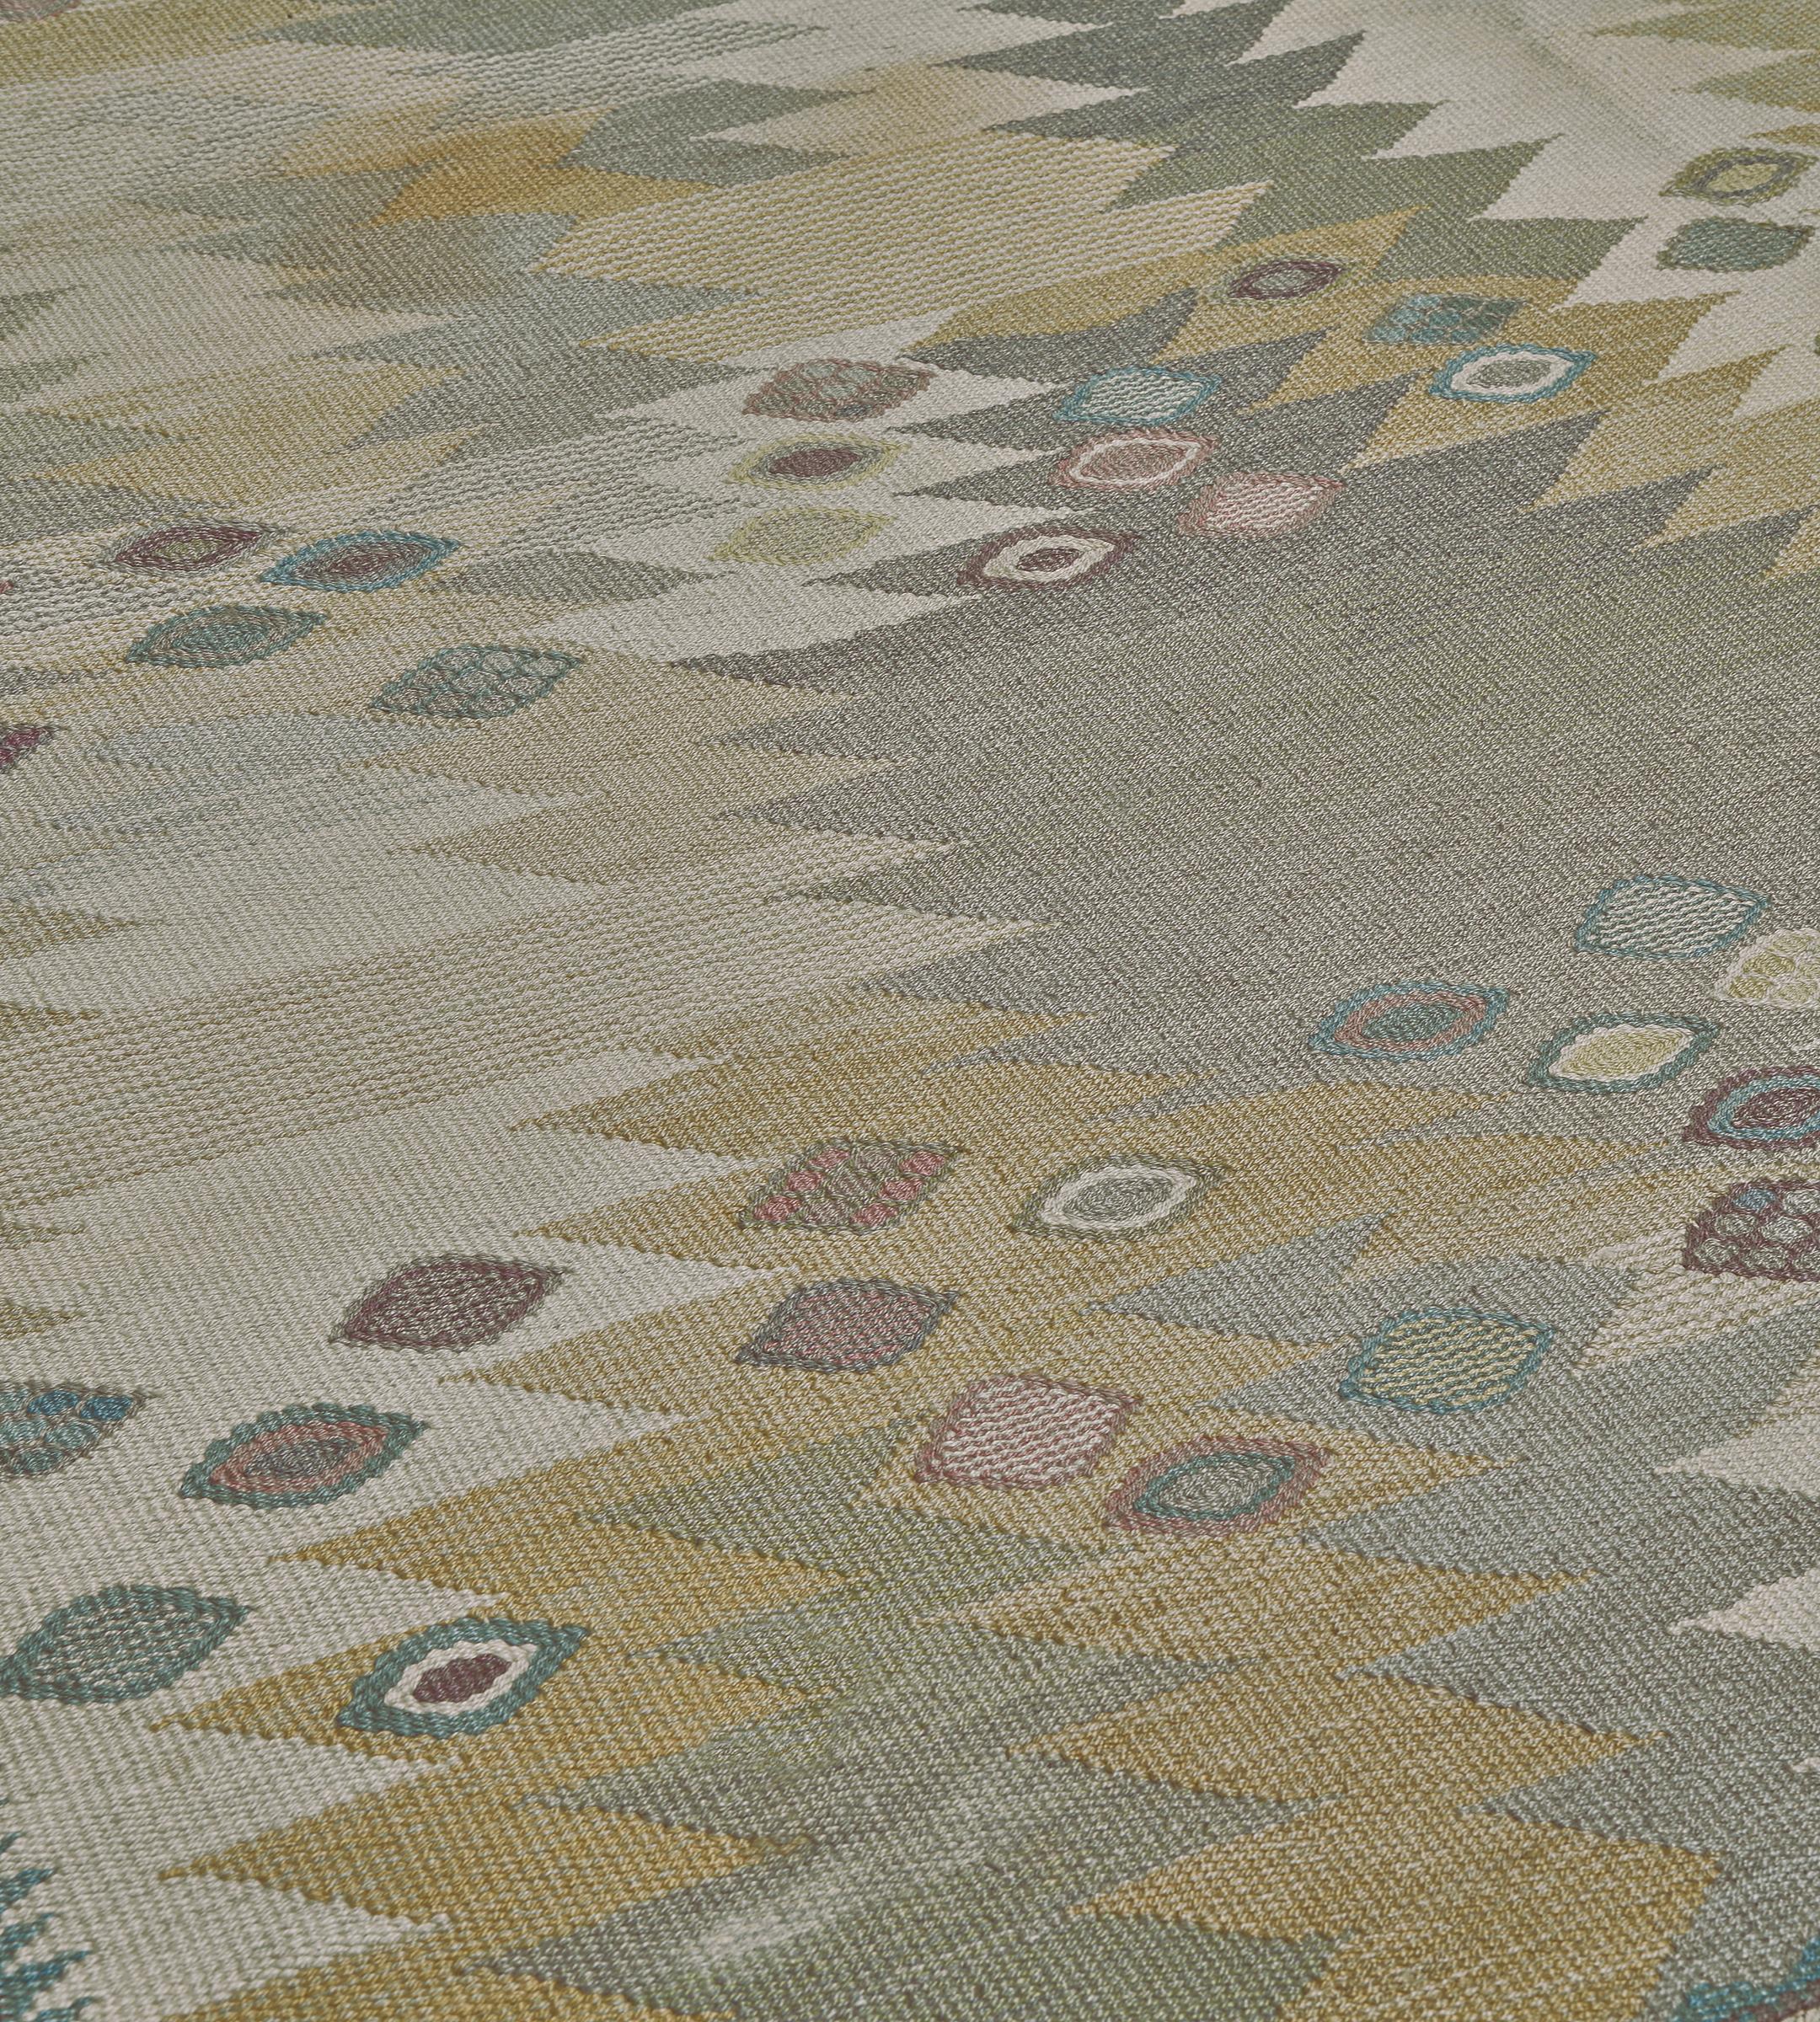 This vintage hand-woven Swedish rug has a tonal overall field of camel, beige, sage and gray interwoven serrated geometric motif, overlaid by polychrome scattered tribal lozenges rows. Signed by the original artist and workshop.

About the Master